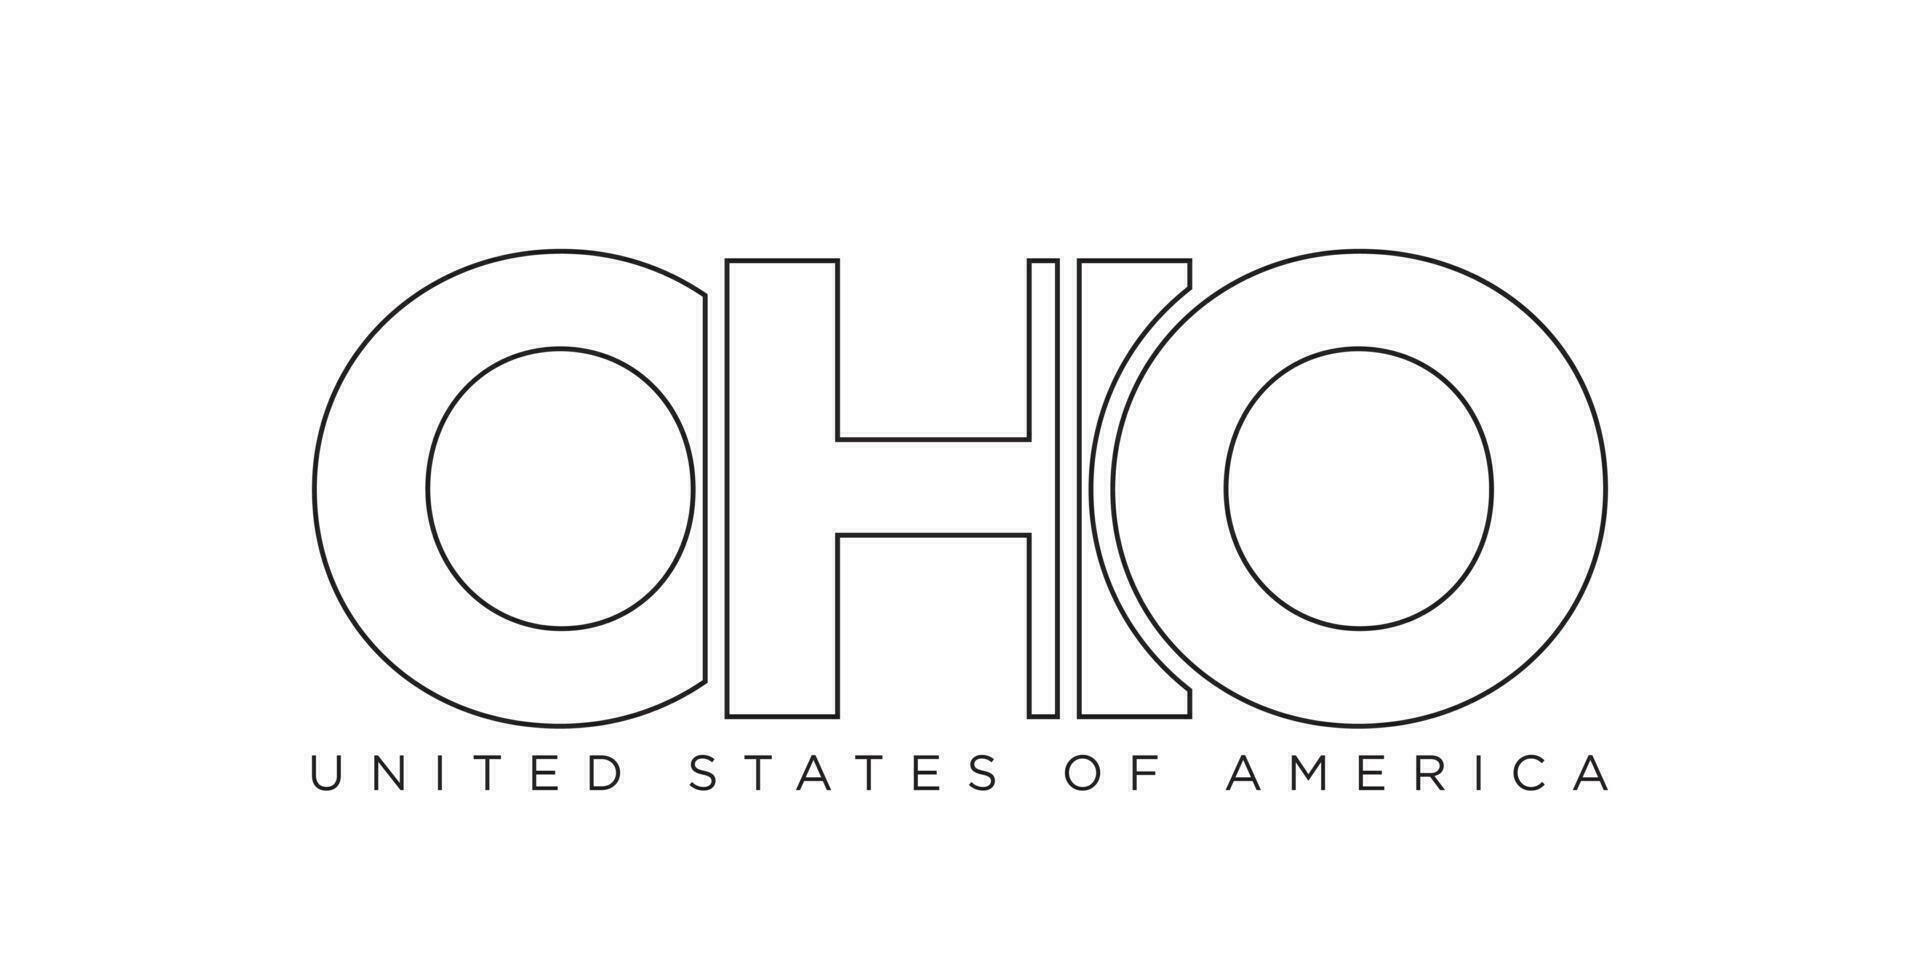 Ohio, USA typography slogan design. America logo with graphic city lettering for print and web. vector